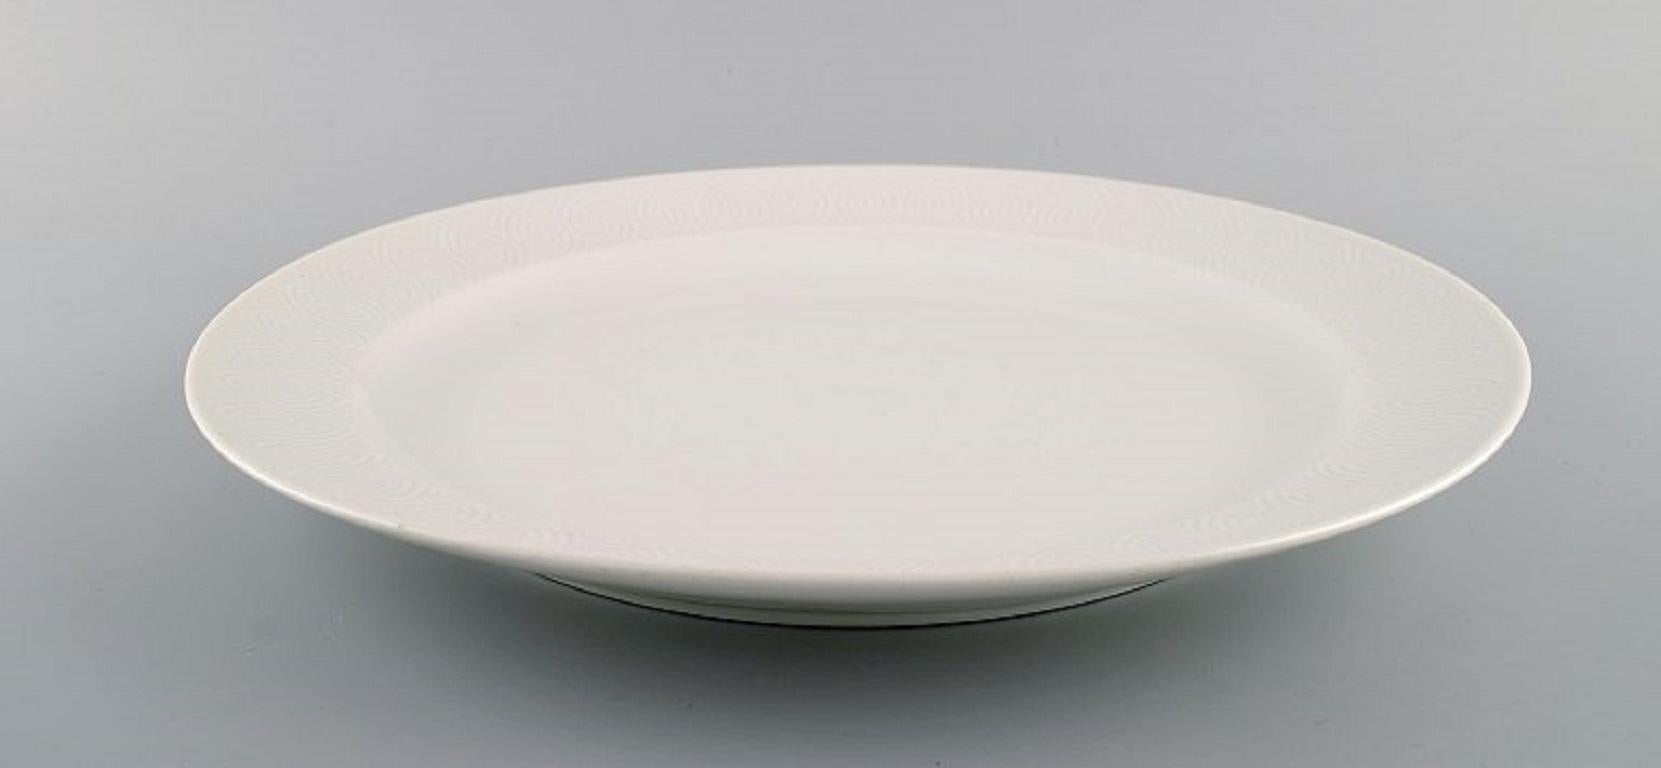 Royal Copenhagen. Salto service, white. Large round serving dish. Dated 1962
Diameter: 34.5 cm.
In excellent condition.
1st factory quality.
Designed by Axel Salto in 1956.